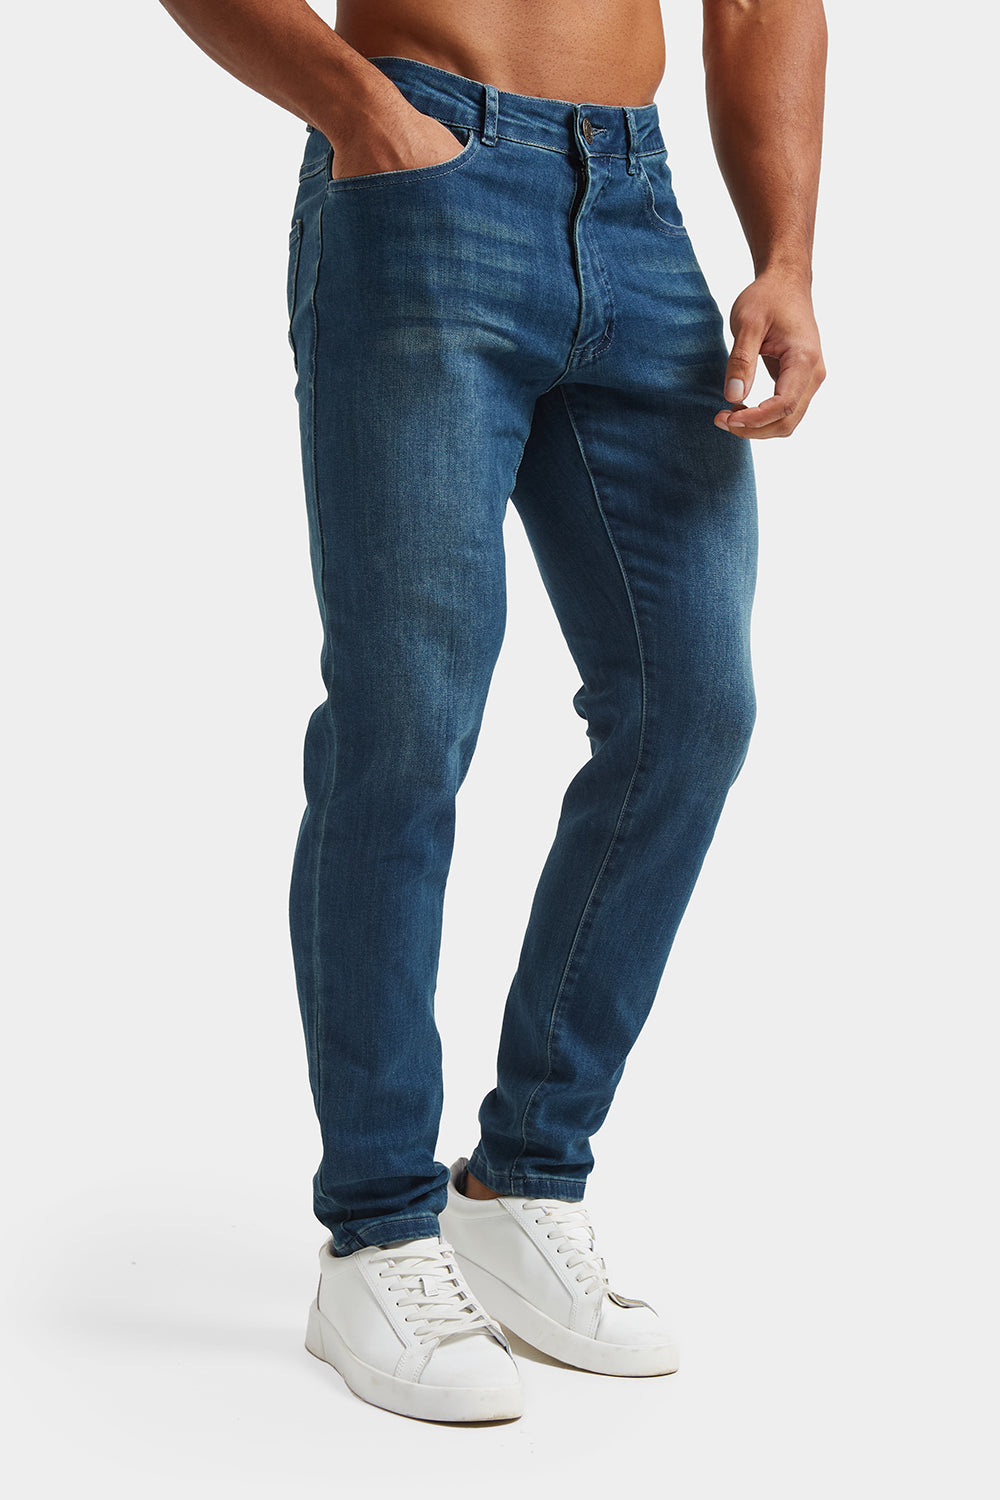 Blue - TAILORED Jeans USA Fit - in Mid ATHLETE Athletic